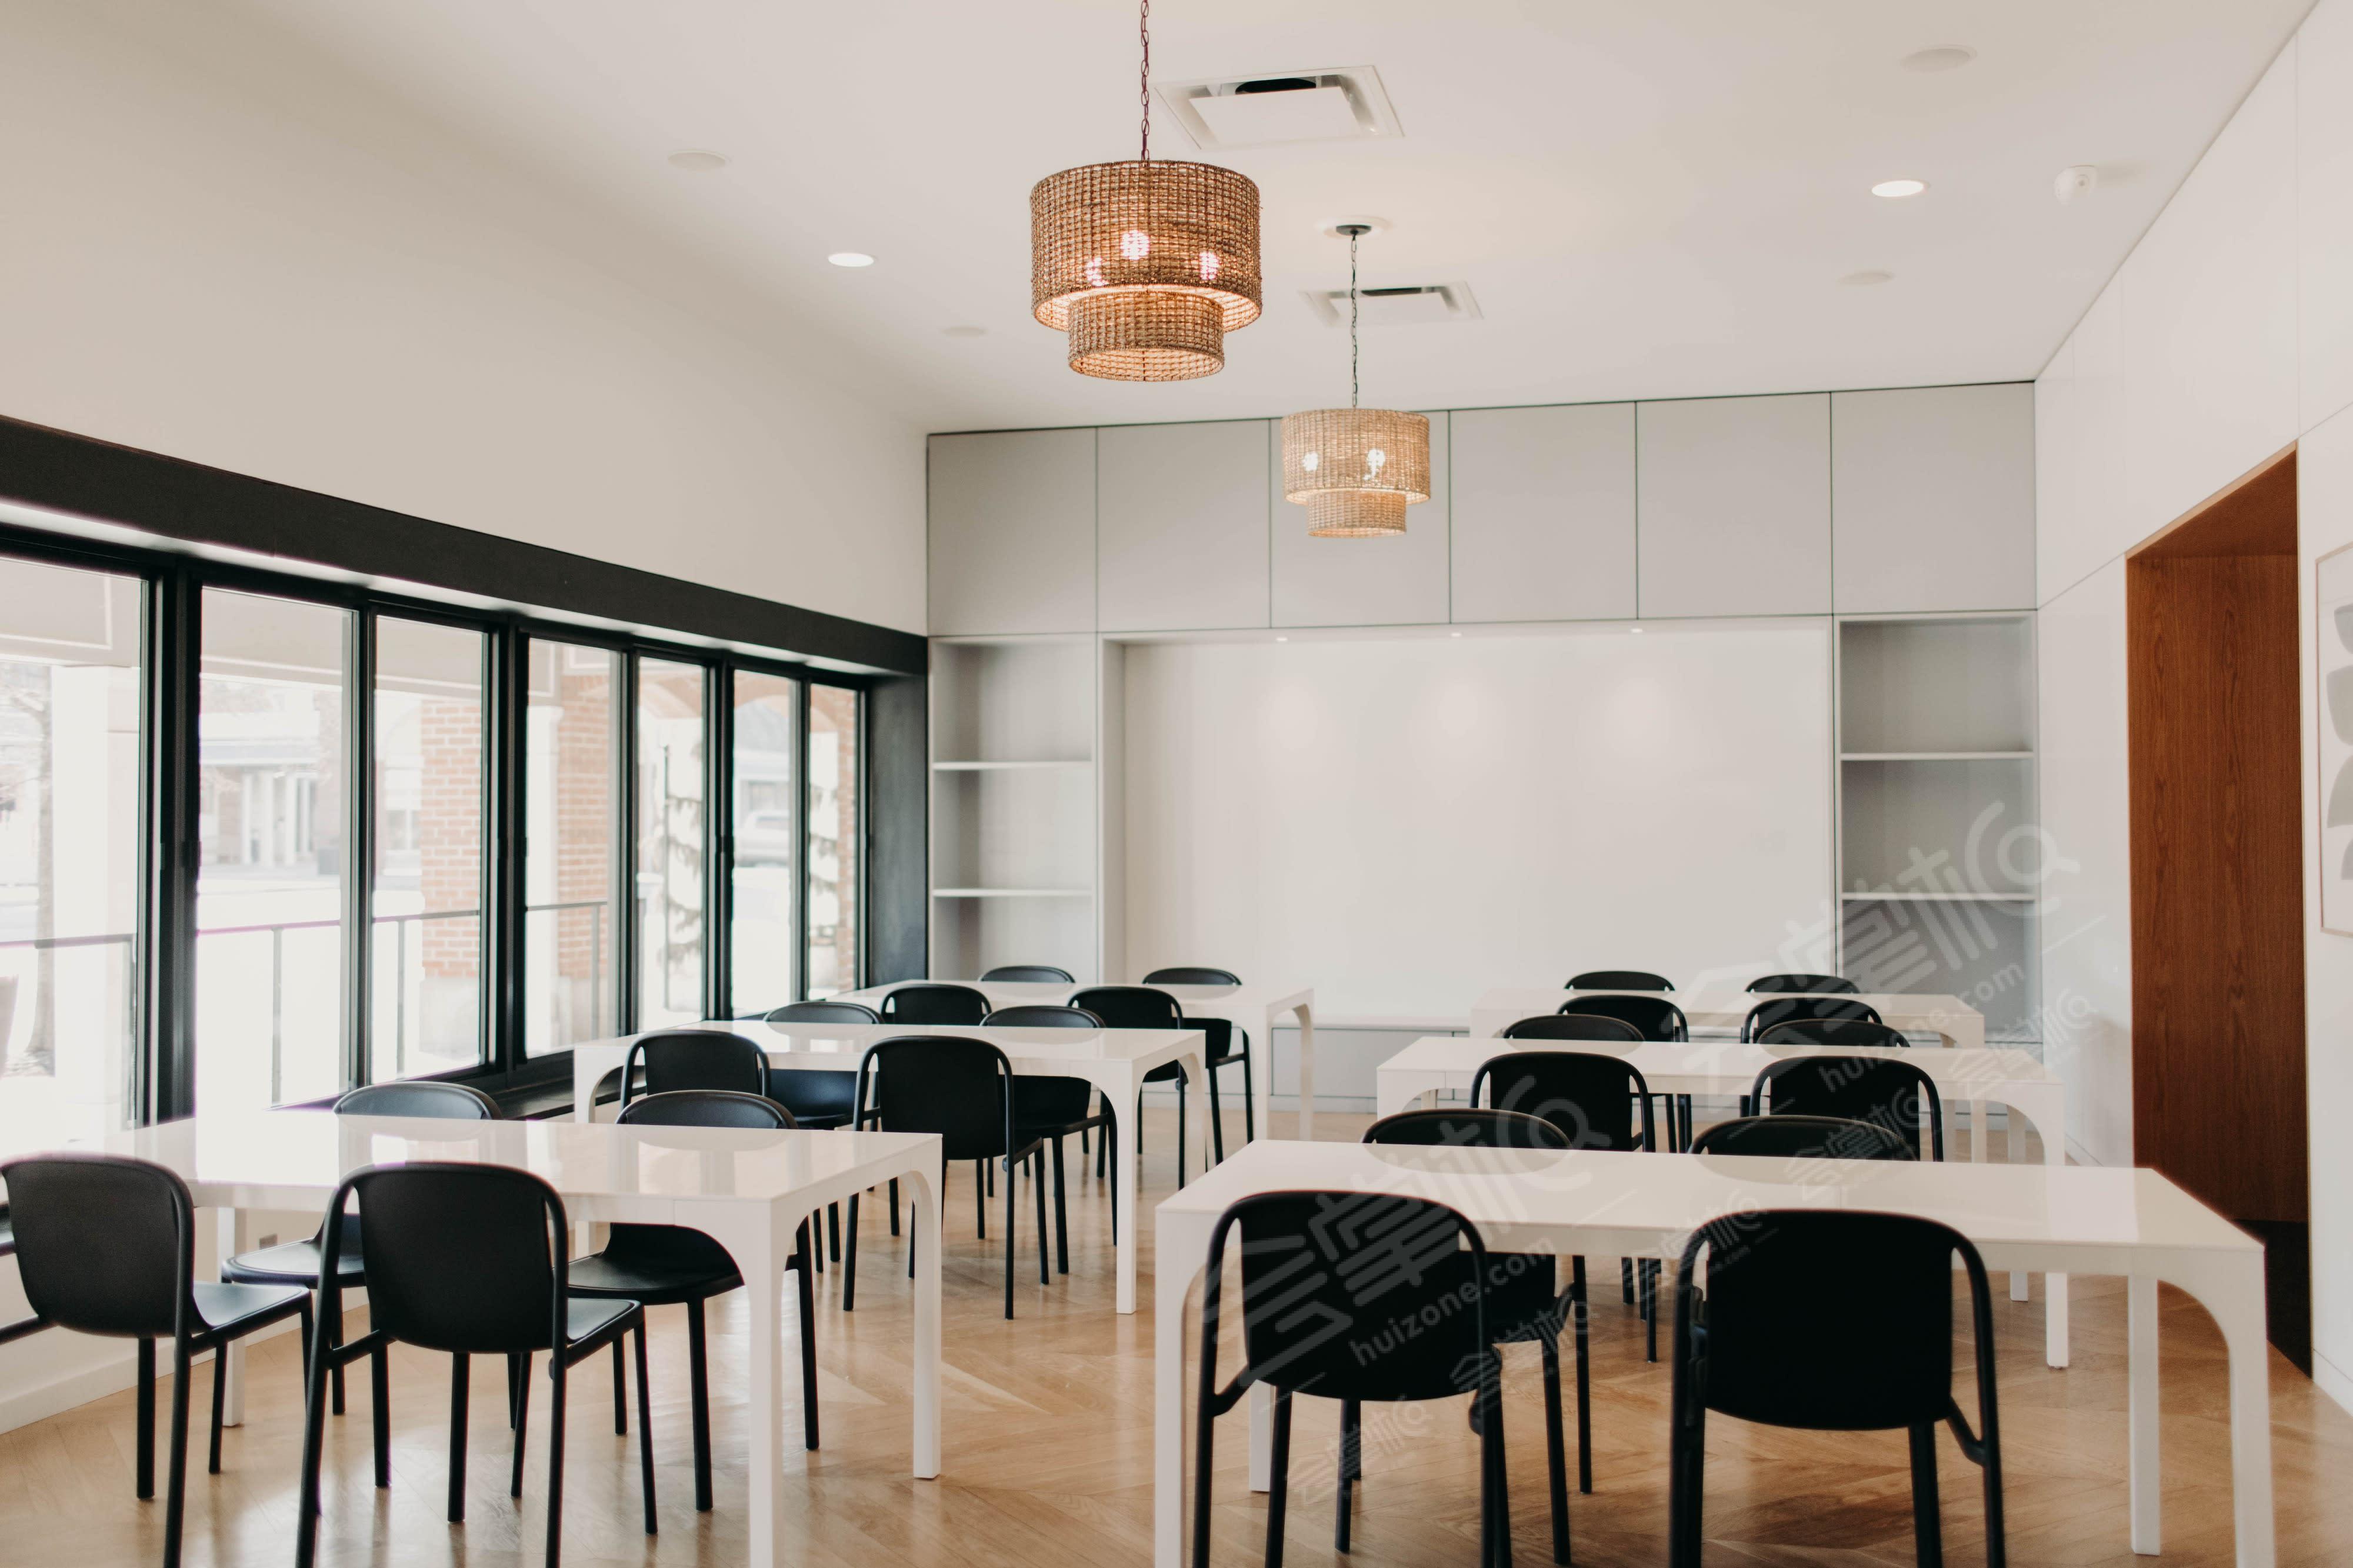 Modern Event Space in the Heart of Prairie Village